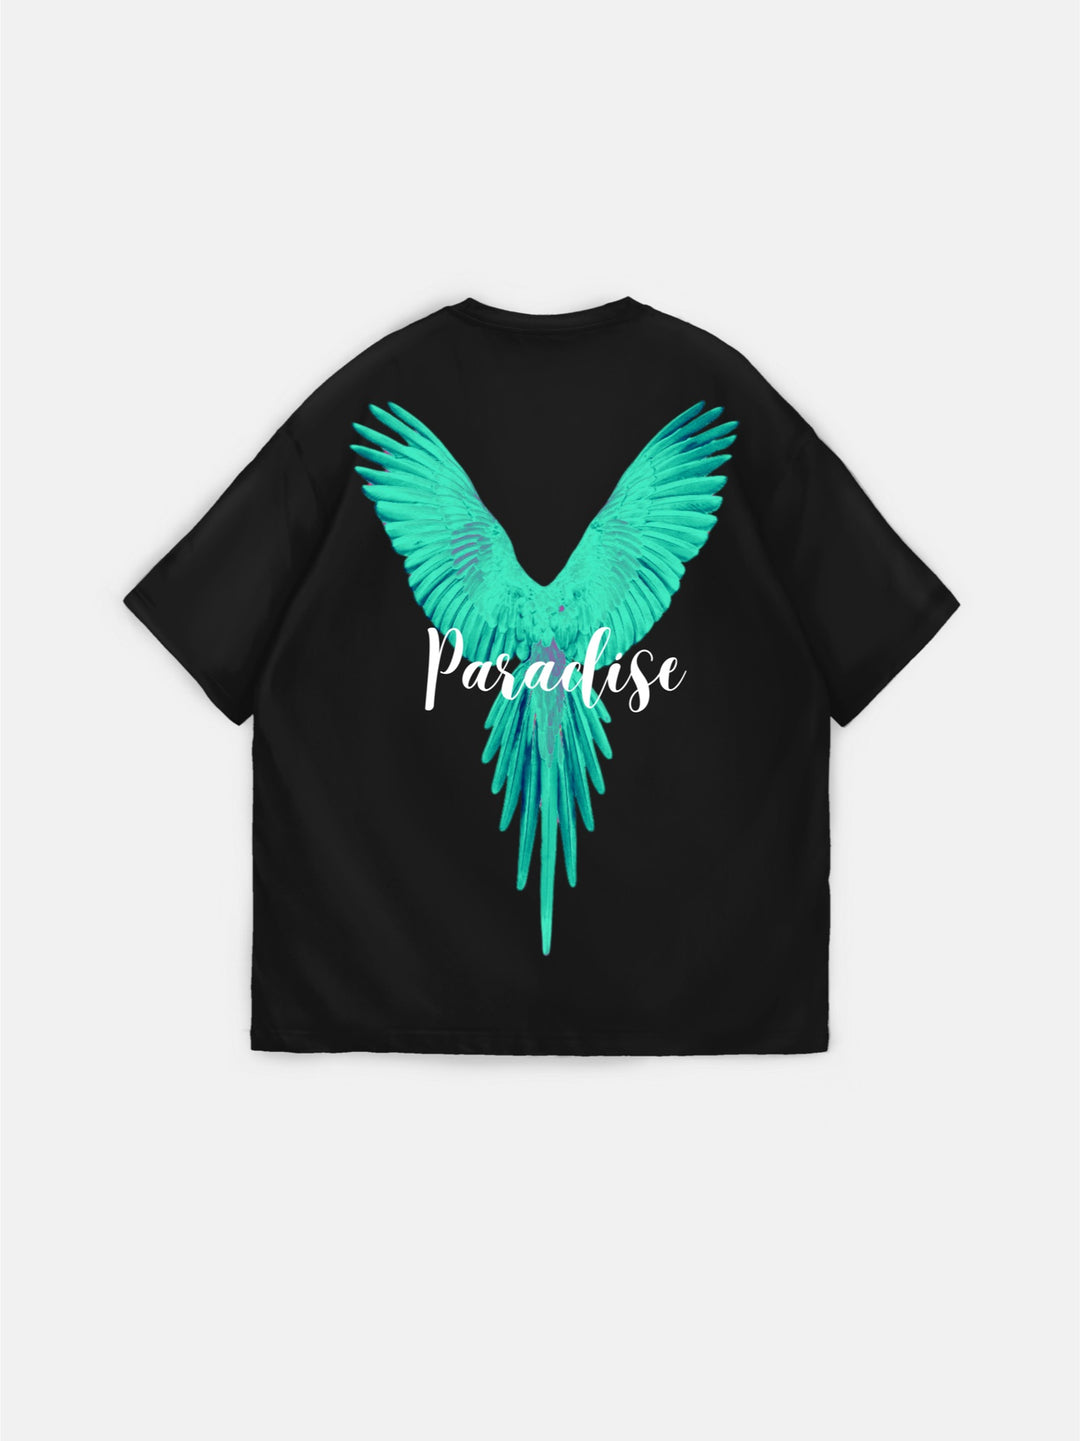 Oversize Parrot Paradise T-shirt - Black and Green